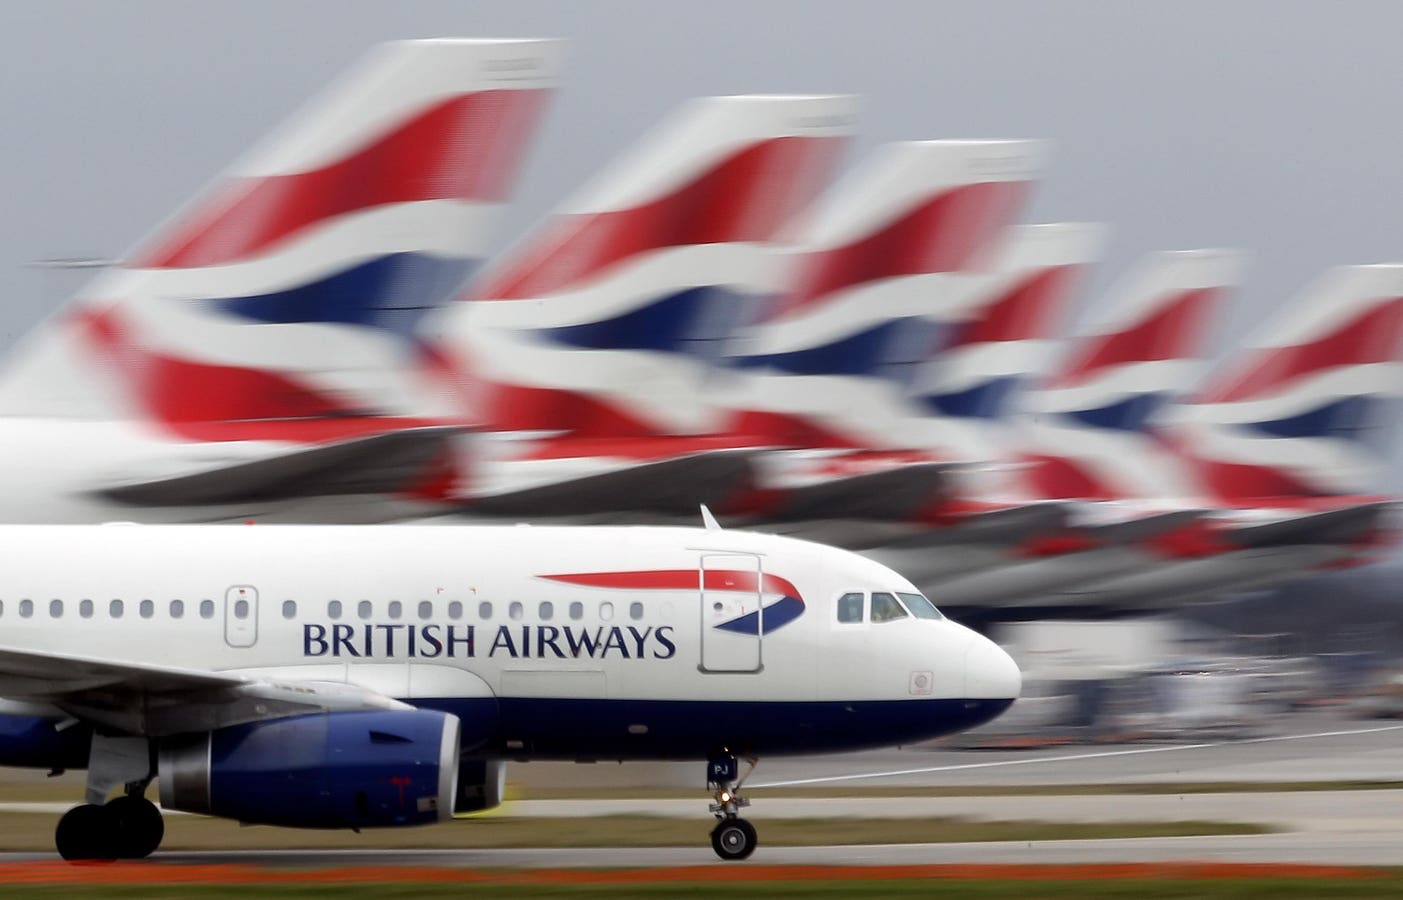 IAG Shares Rise On News Of Record Profits, No Dividends Yet